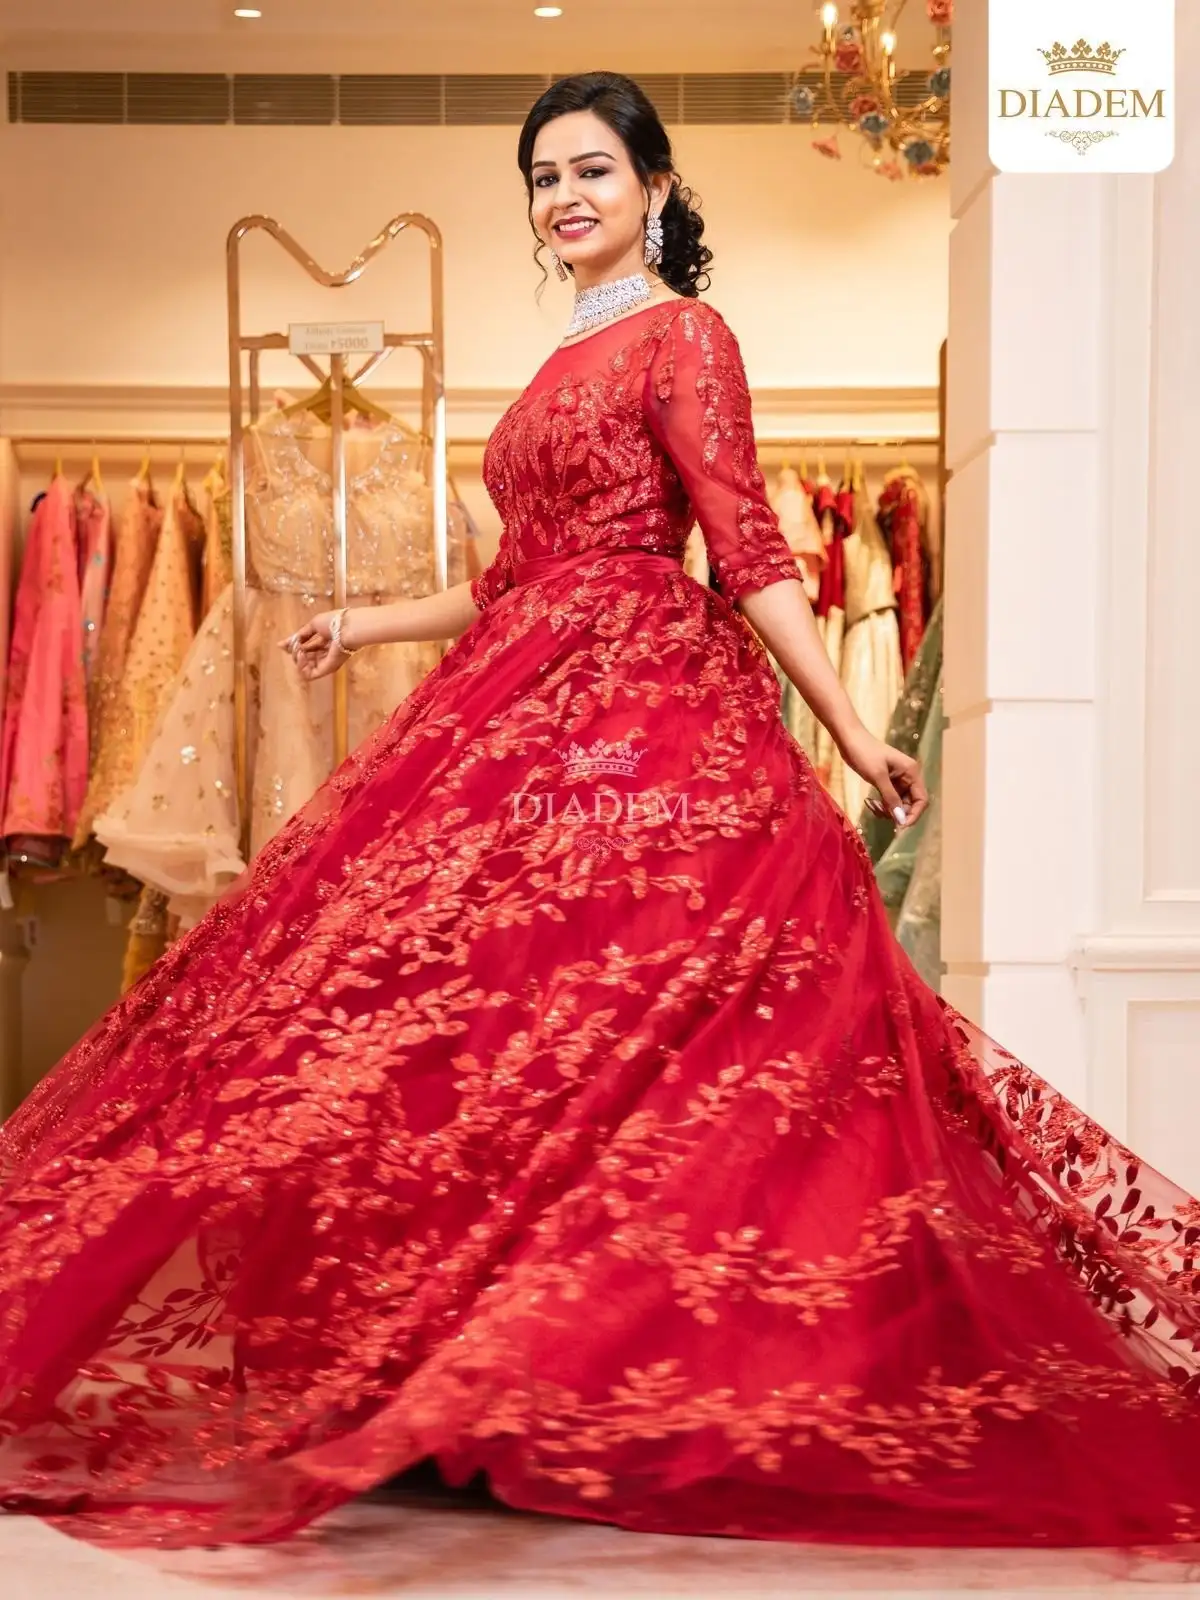 Red Ball Gown Embellished With Floral Laces And Beads